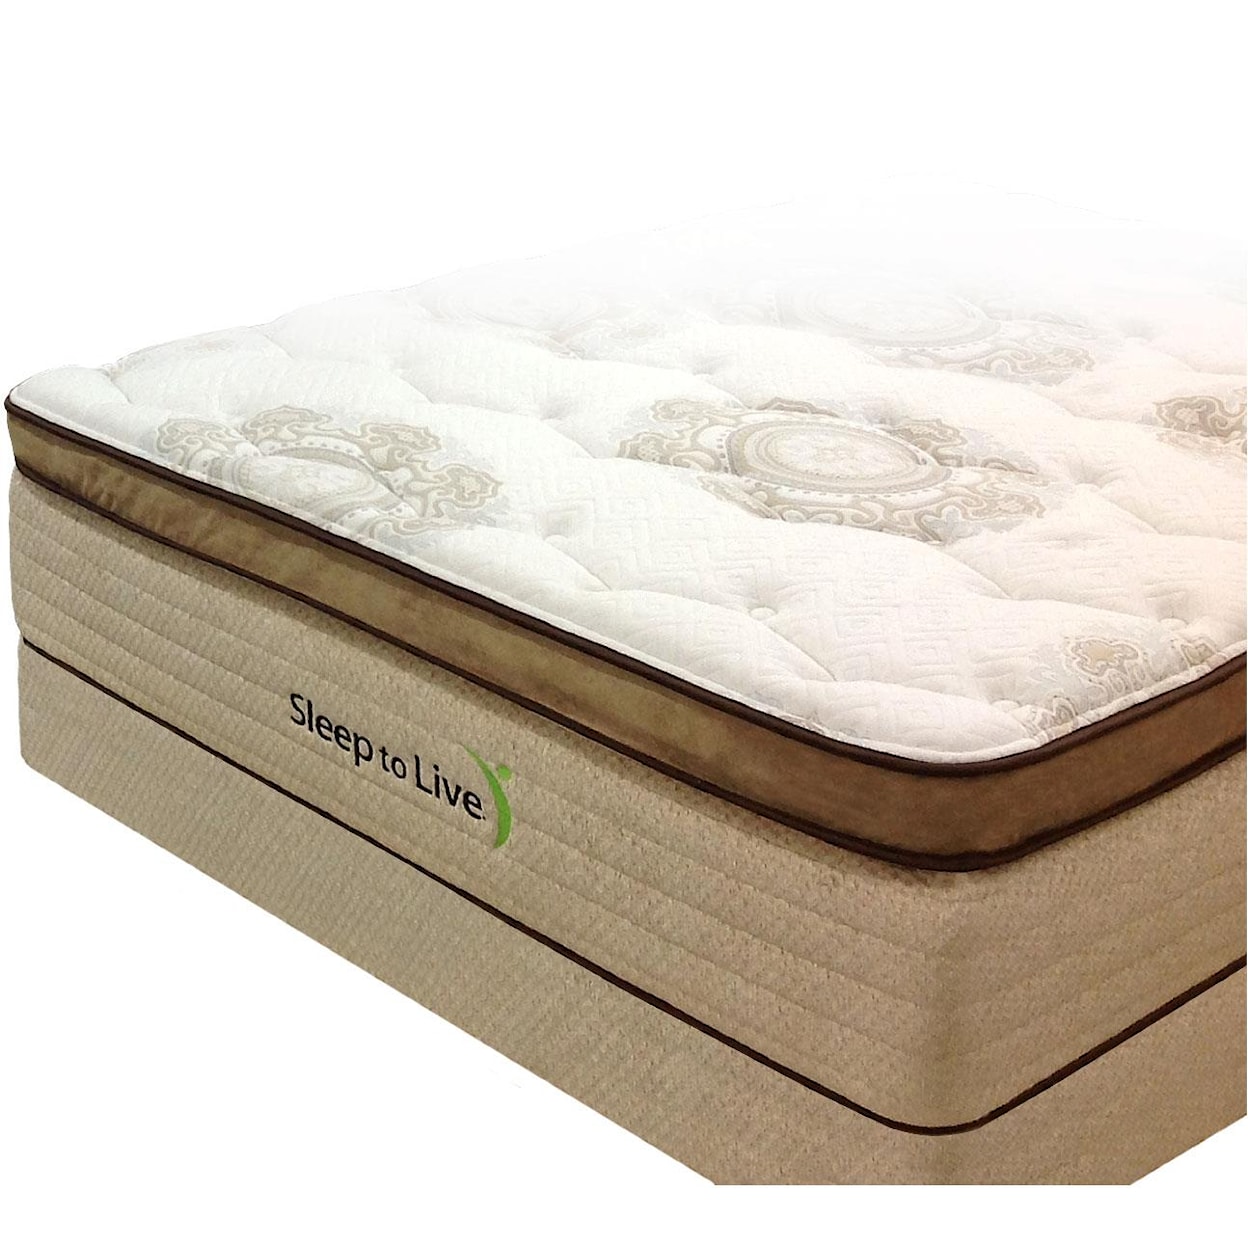 Kingsdown Body System 1 Queen Pocketed Coil Mattress